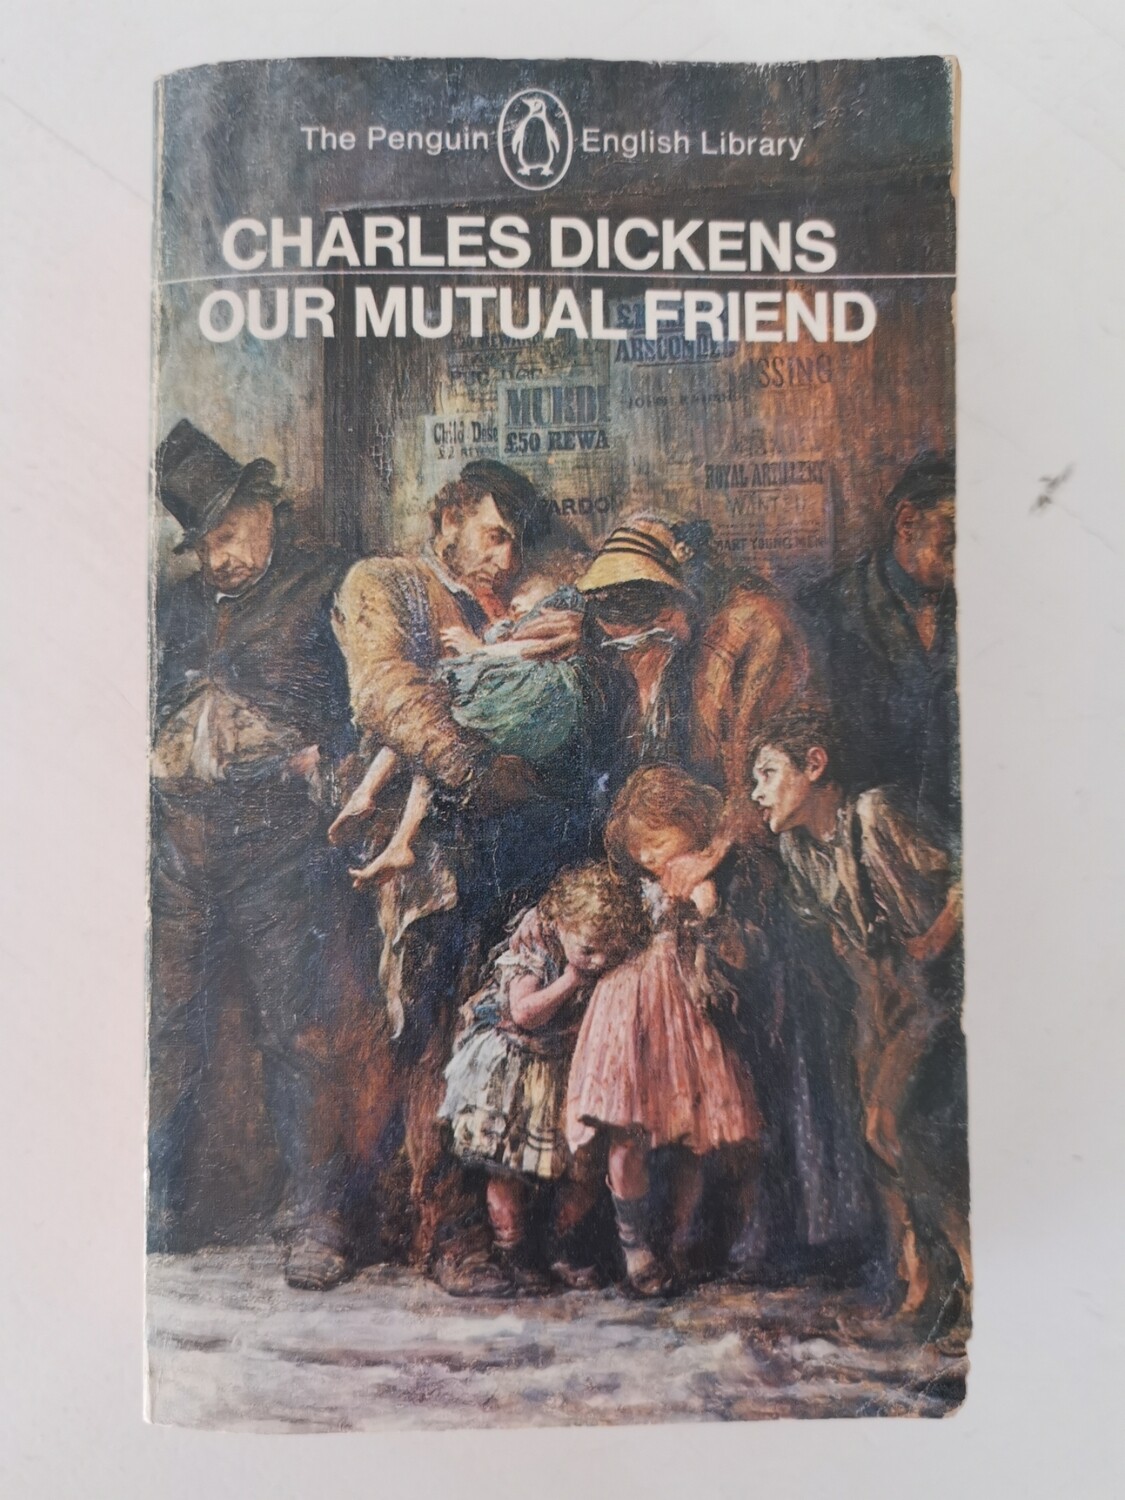 Our mutual friend, Charles Dickens